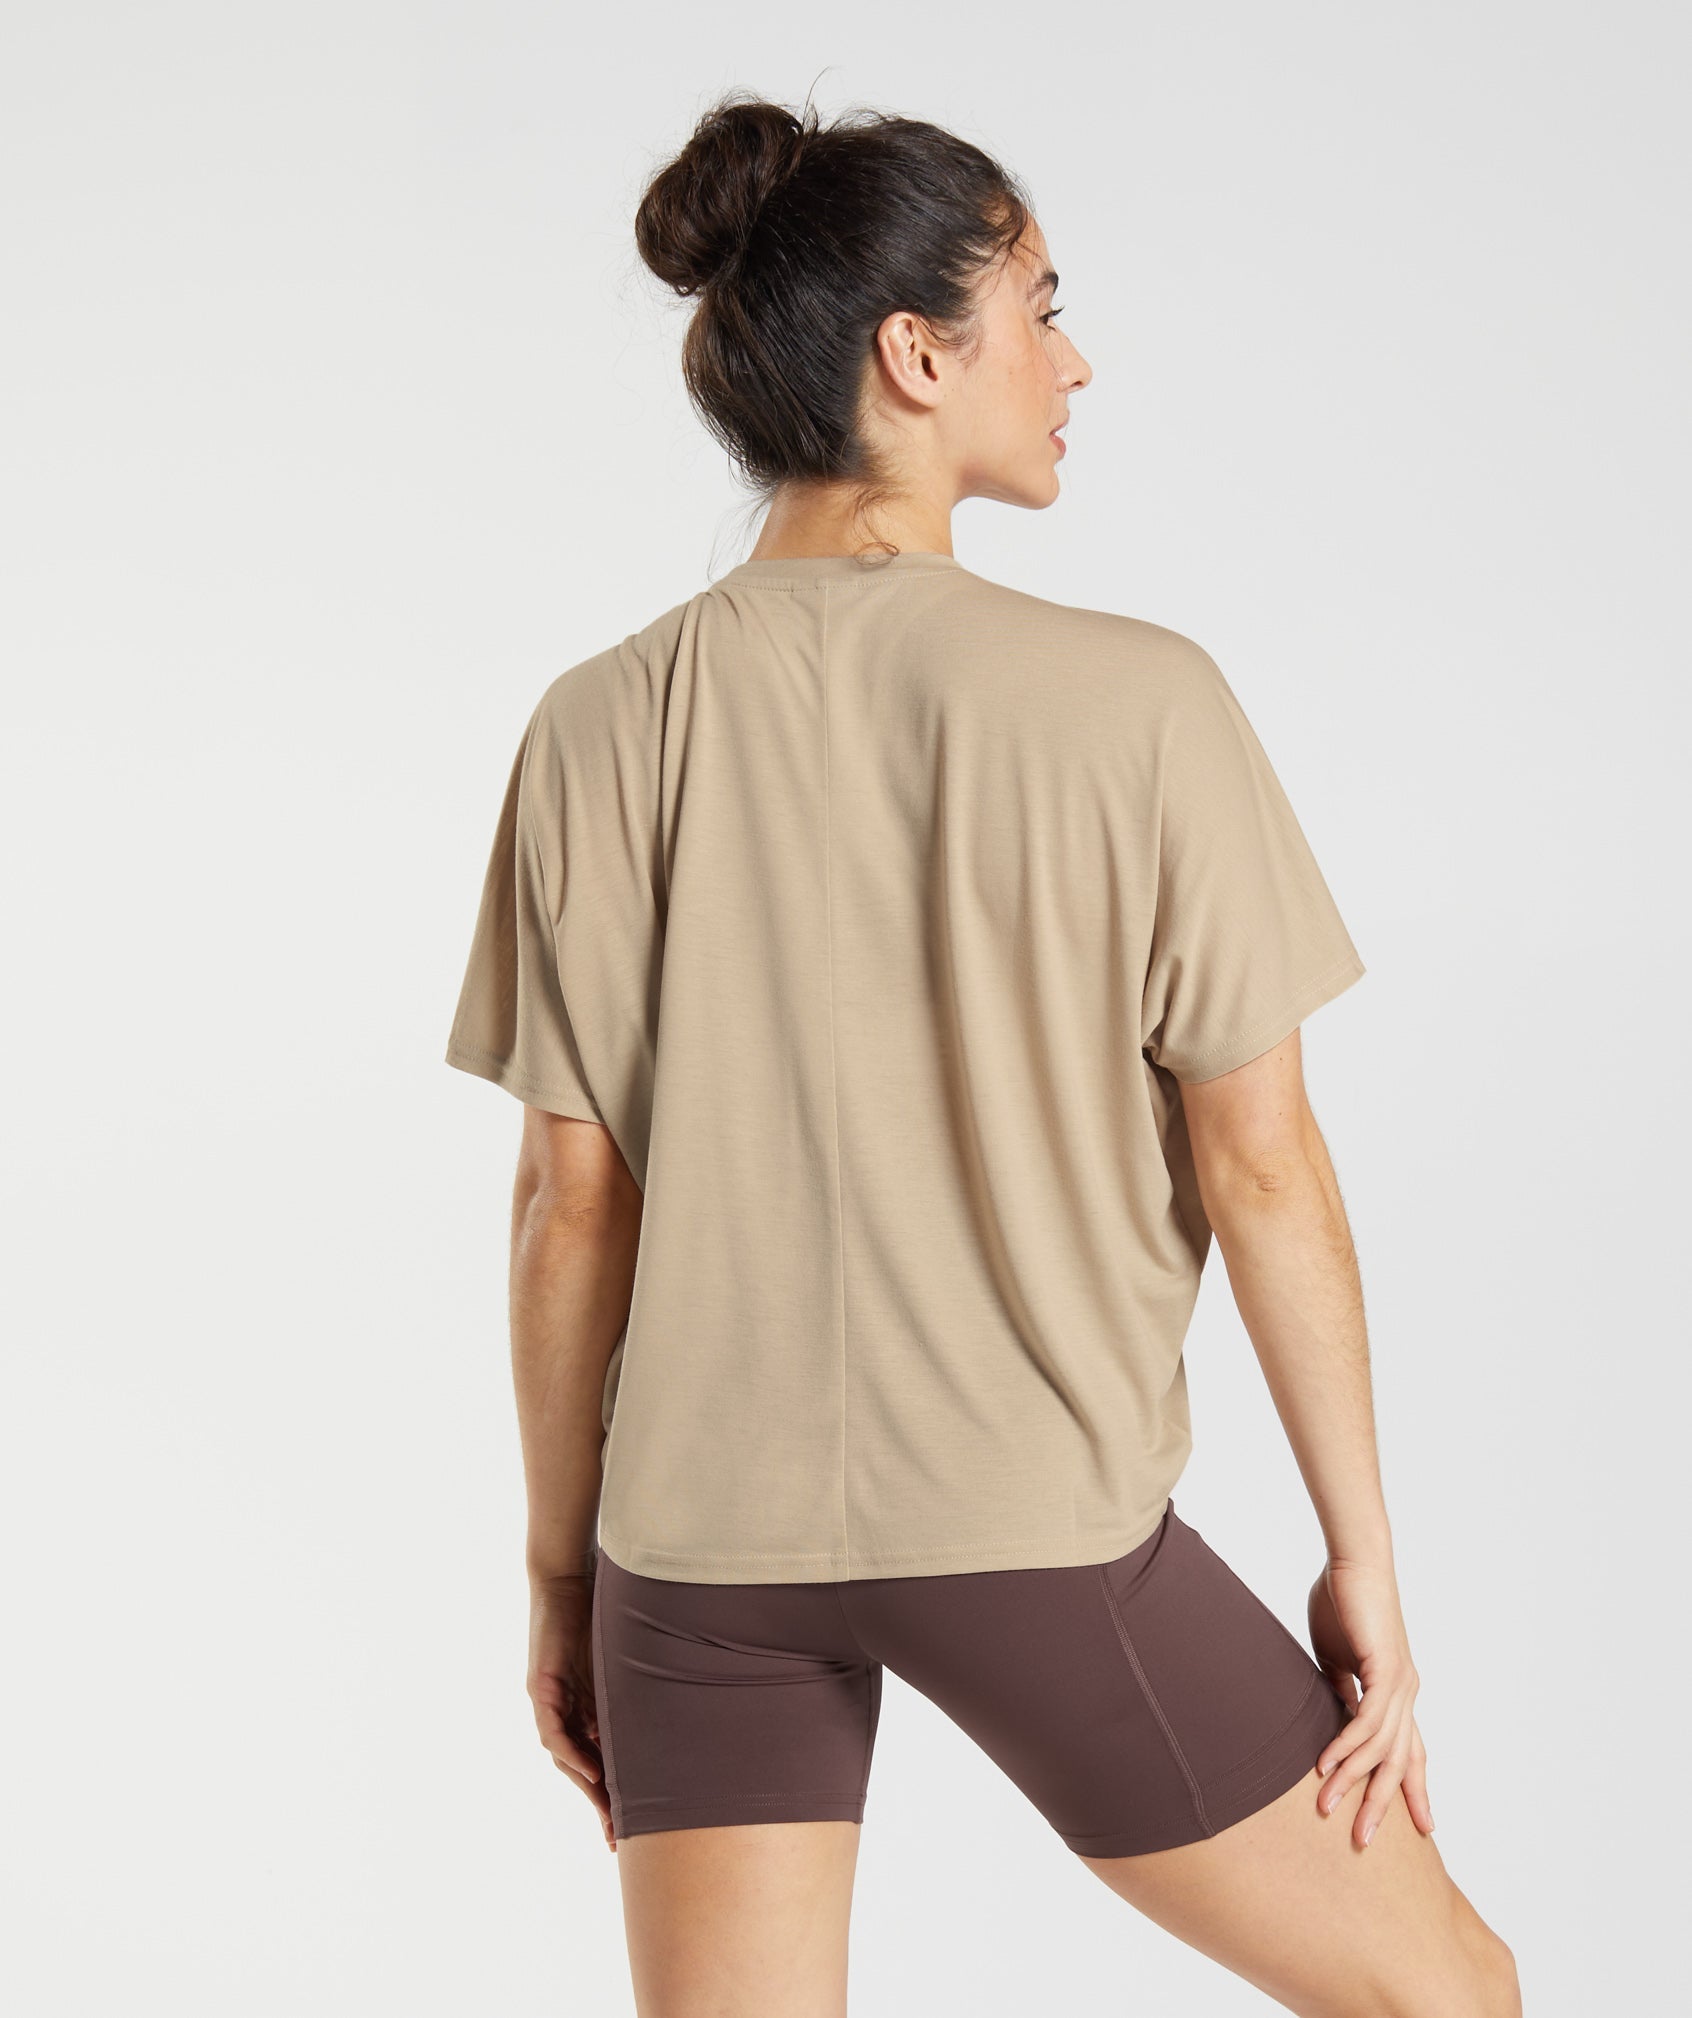 Super Soft T-Shirt in Toasted Brown - view 2